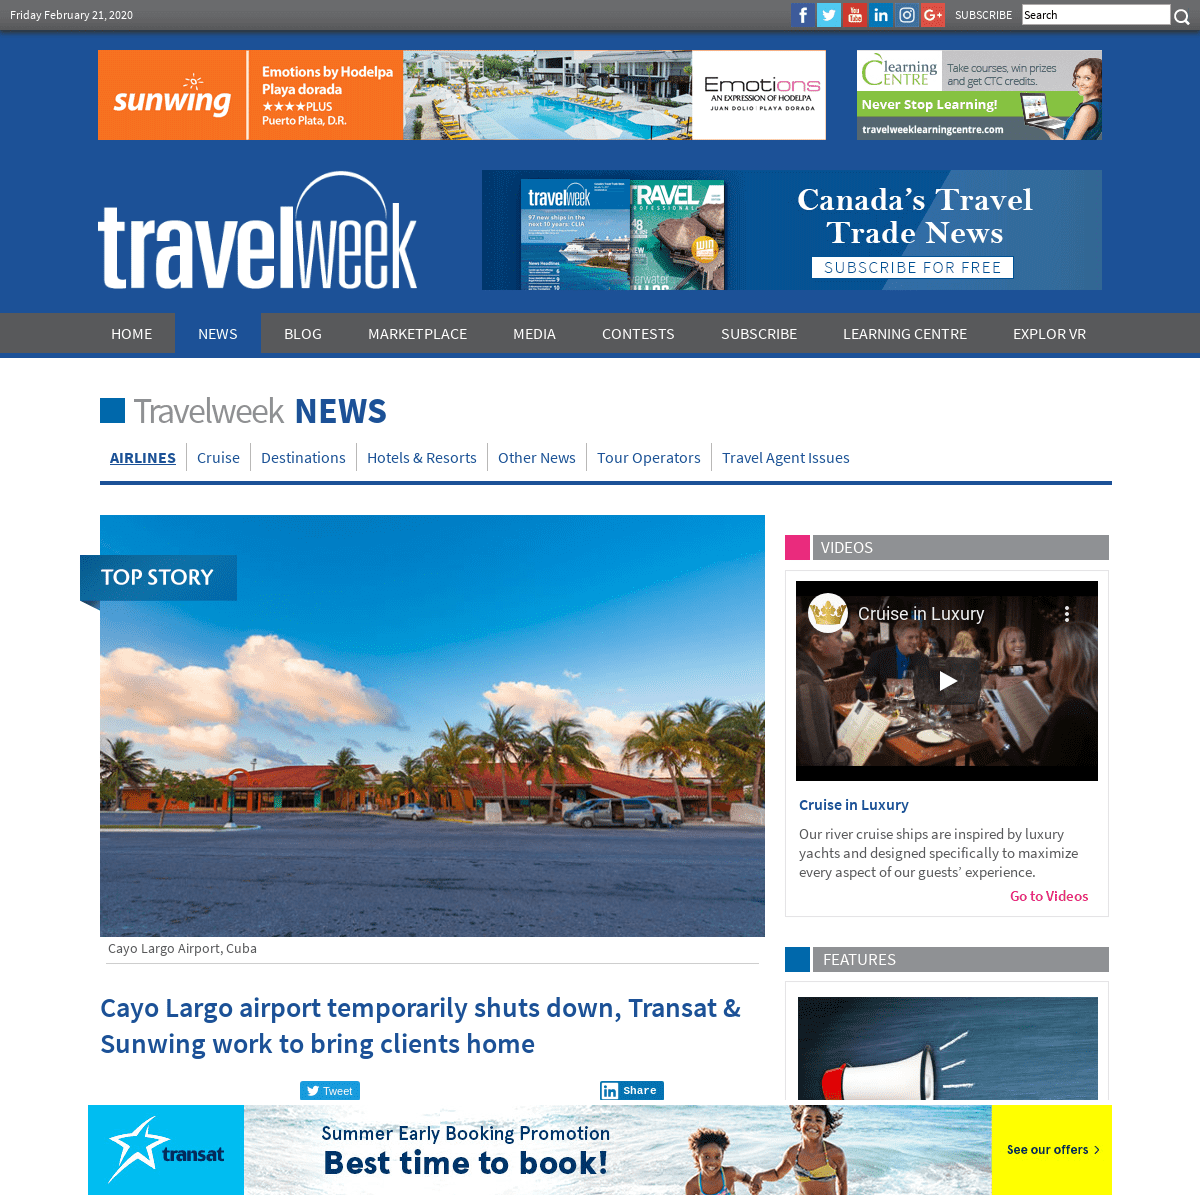 A complete backup of www.travelweek.ca/news/cayo-largo-airport-temporarily-shuts-down-reopening-feb-26/